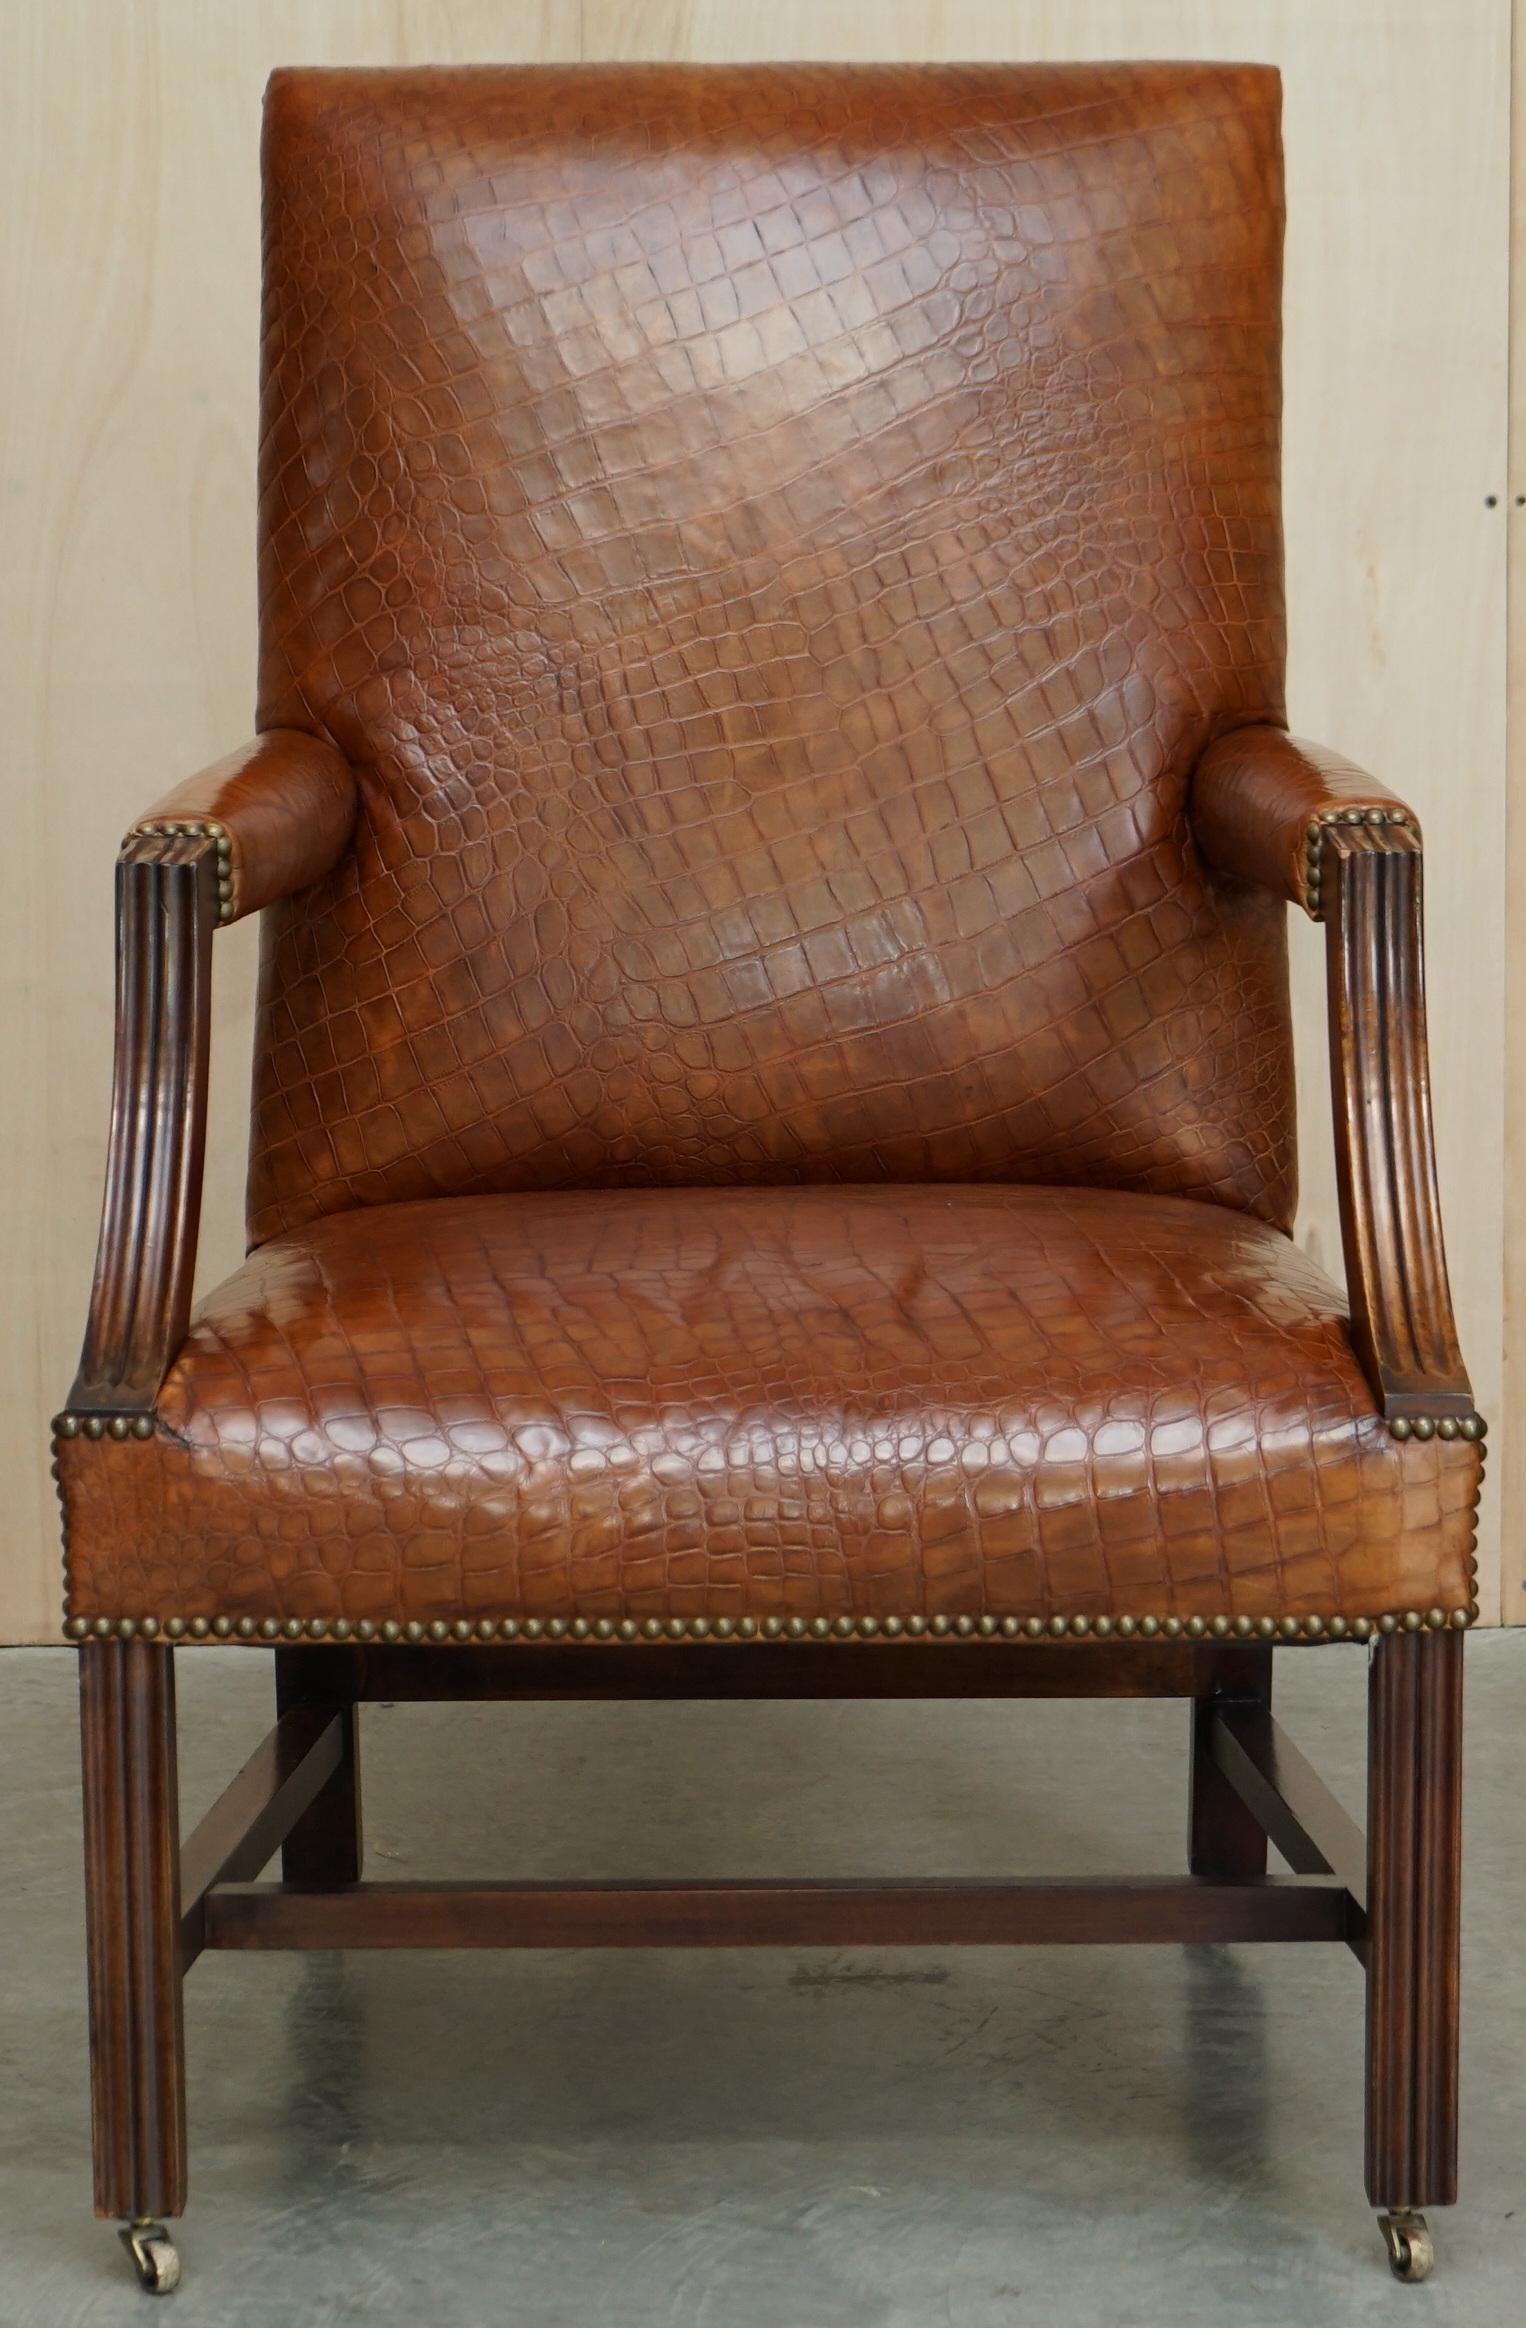 We are delighted to offer for sale this stunning Ralph Lauren Library reading armchair with Crocodile / Alligator patina brown leather upholstery.

A very good looking and well made piece, I’ve only ever seen one other of these in all my time, the